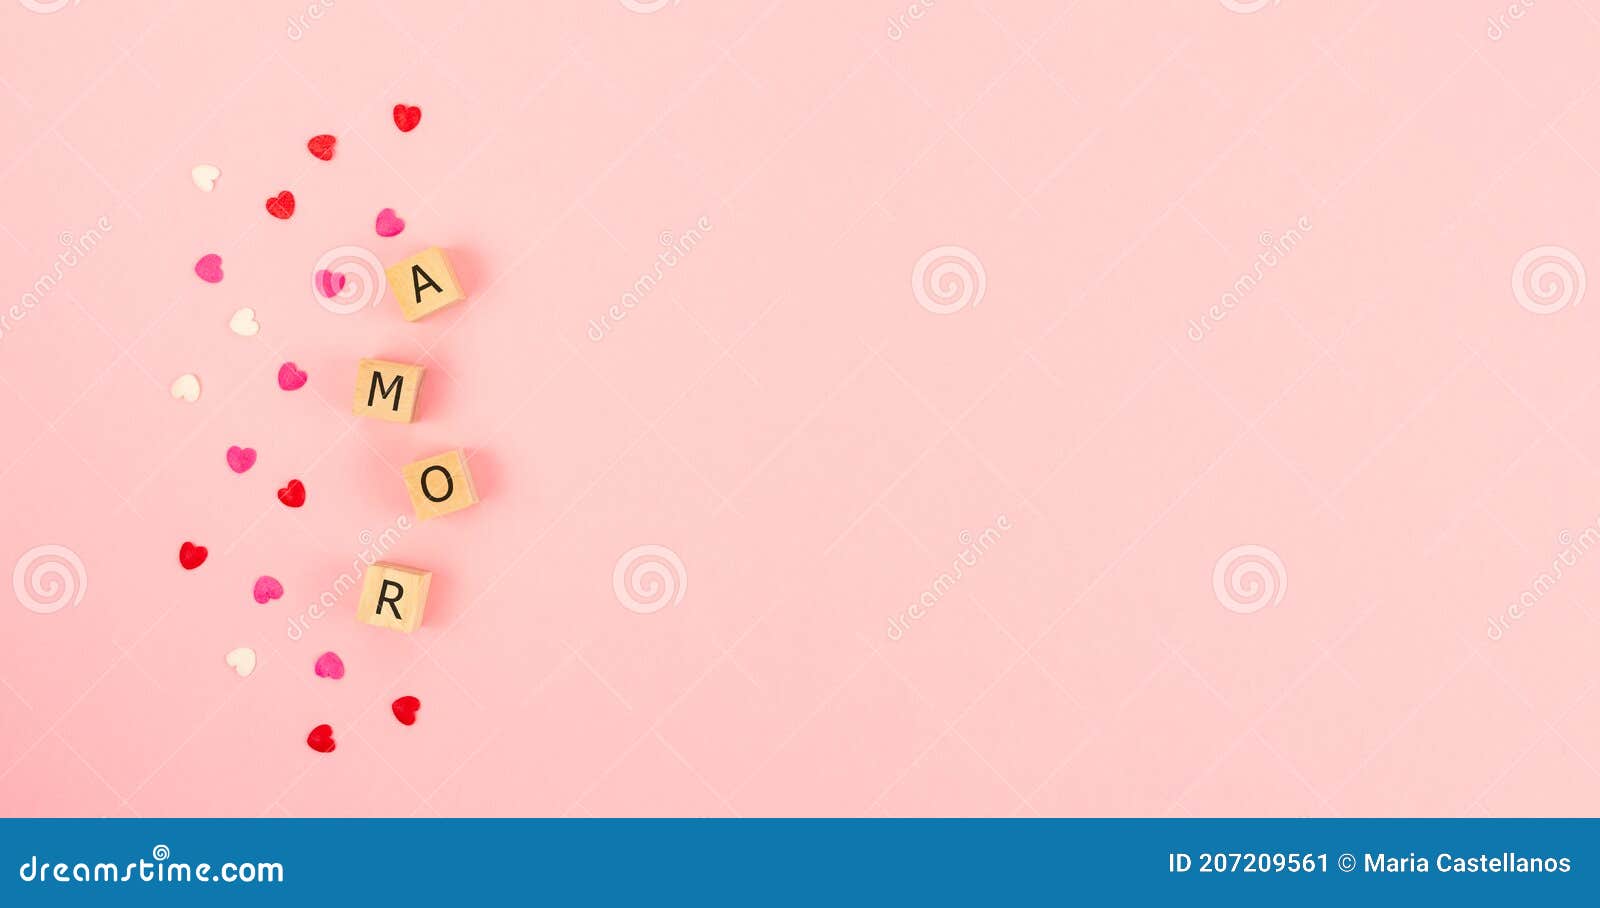 word amor on wooden cubes in a pink background. copy space